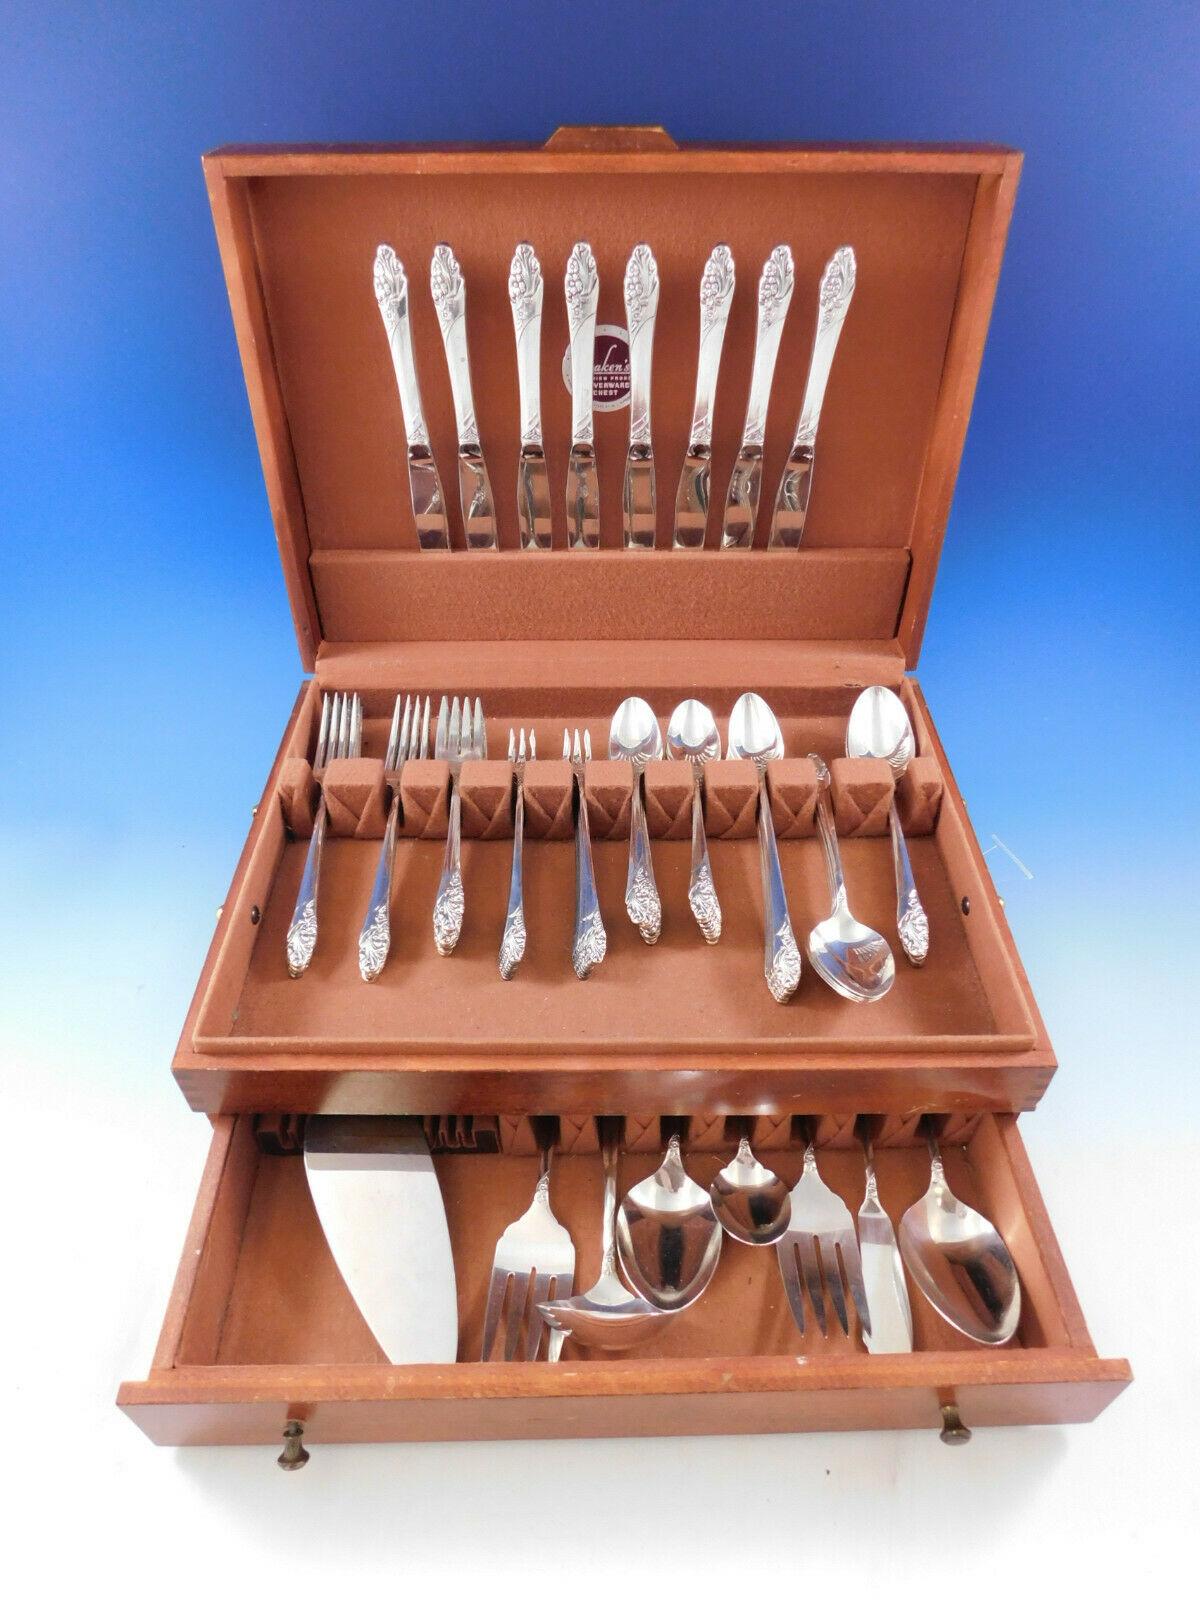 Evening Star by Community plate silverplate flatware set of 80 pieces. This set includes:

8 dinner knives, 9 1/4